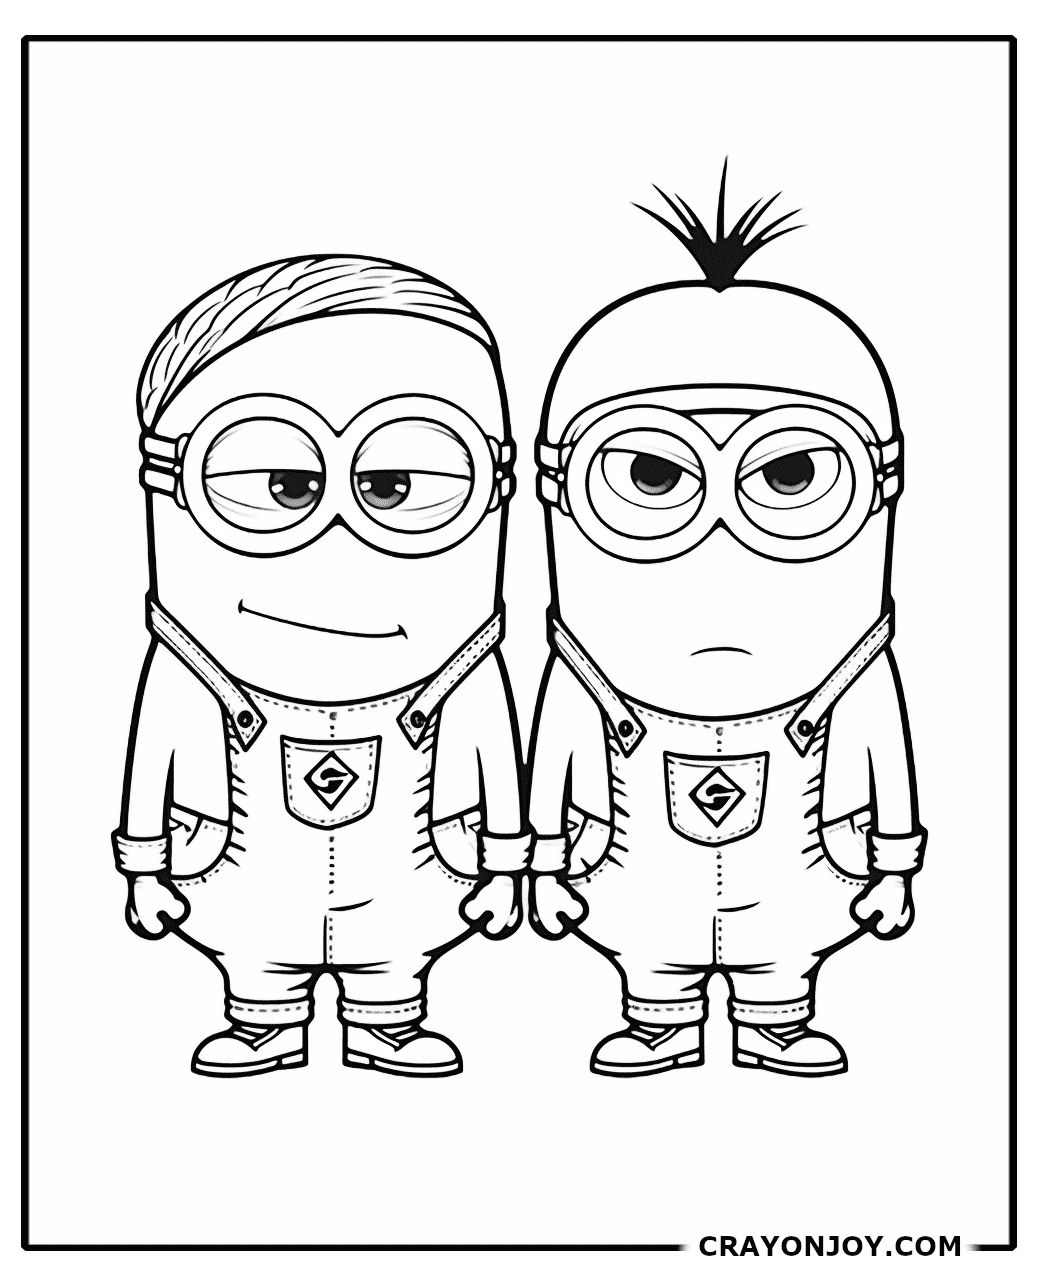 Free Printable Minion Coloring Pages for Kids and Adults